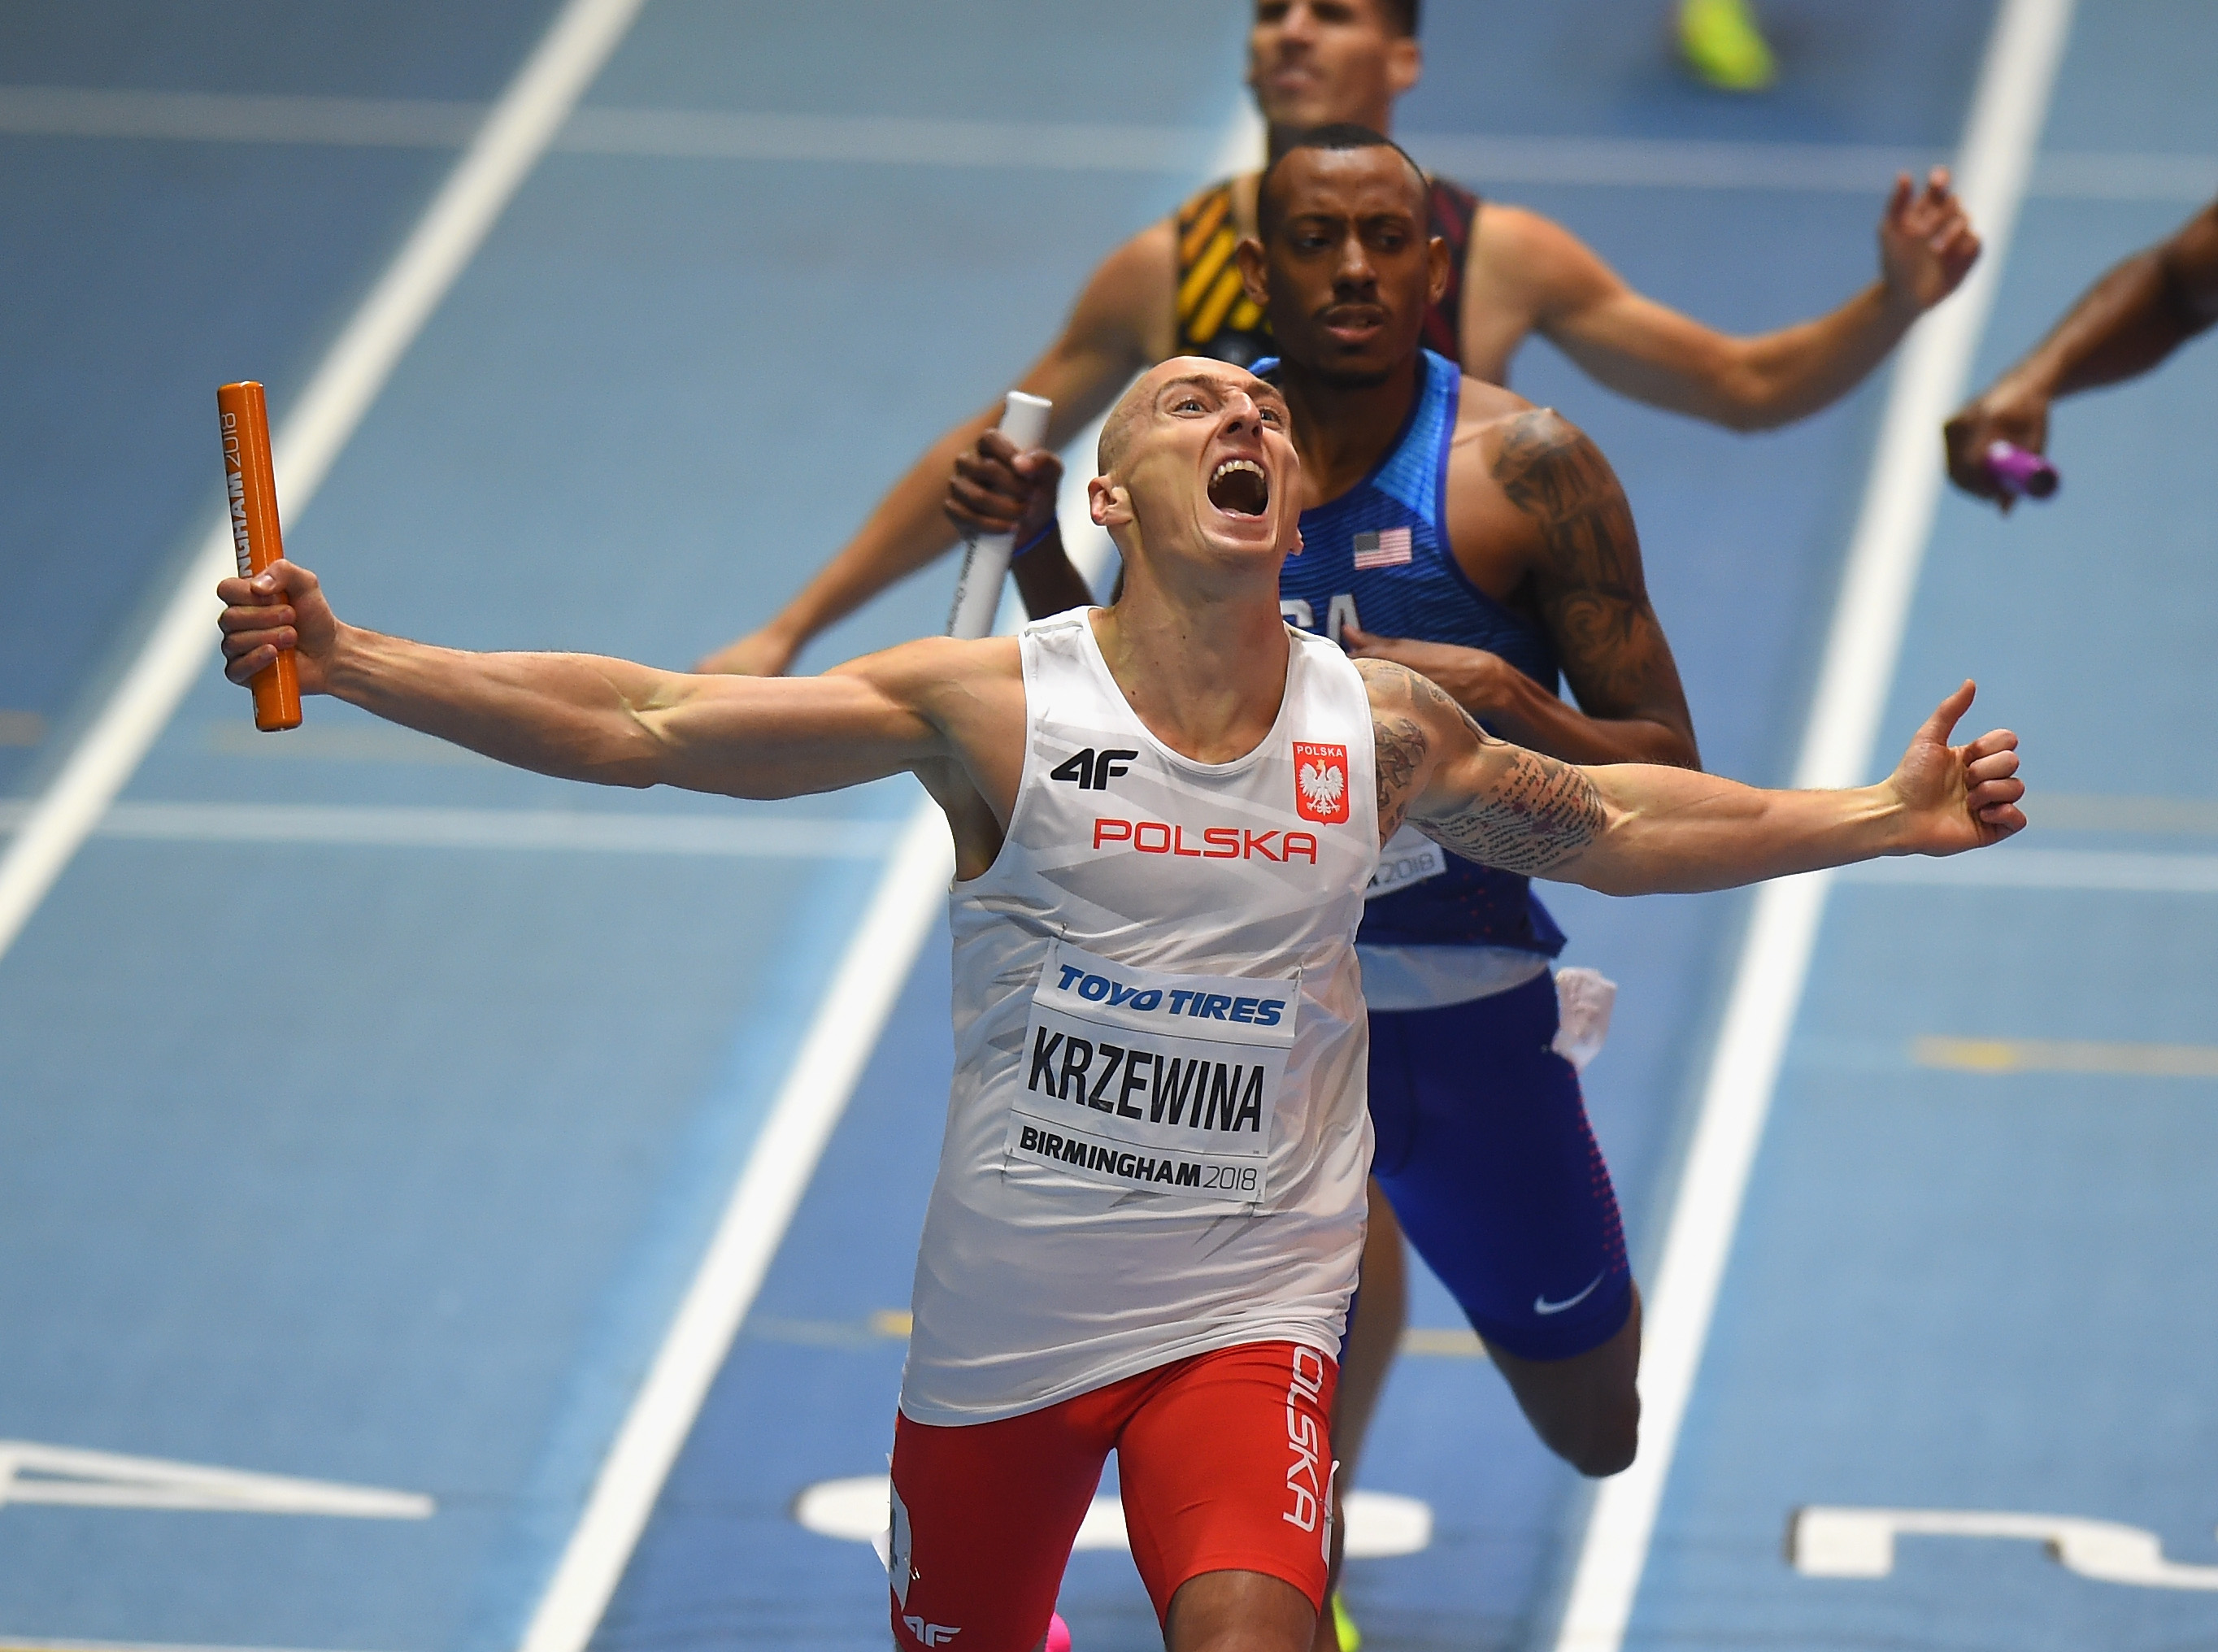 BIRMINGHAM, ENGLAND - MARCH 04: Jakub Krzewina of Poland wins the Men's 4 x 400m Relay Final from Vernon Norwood of the United States during Day Four of the IAAF World Indoor Championships at Arena Birmingham on March 4, 2018 in Birmingham, England. (Photo by Tony Marshall/Getty Images)